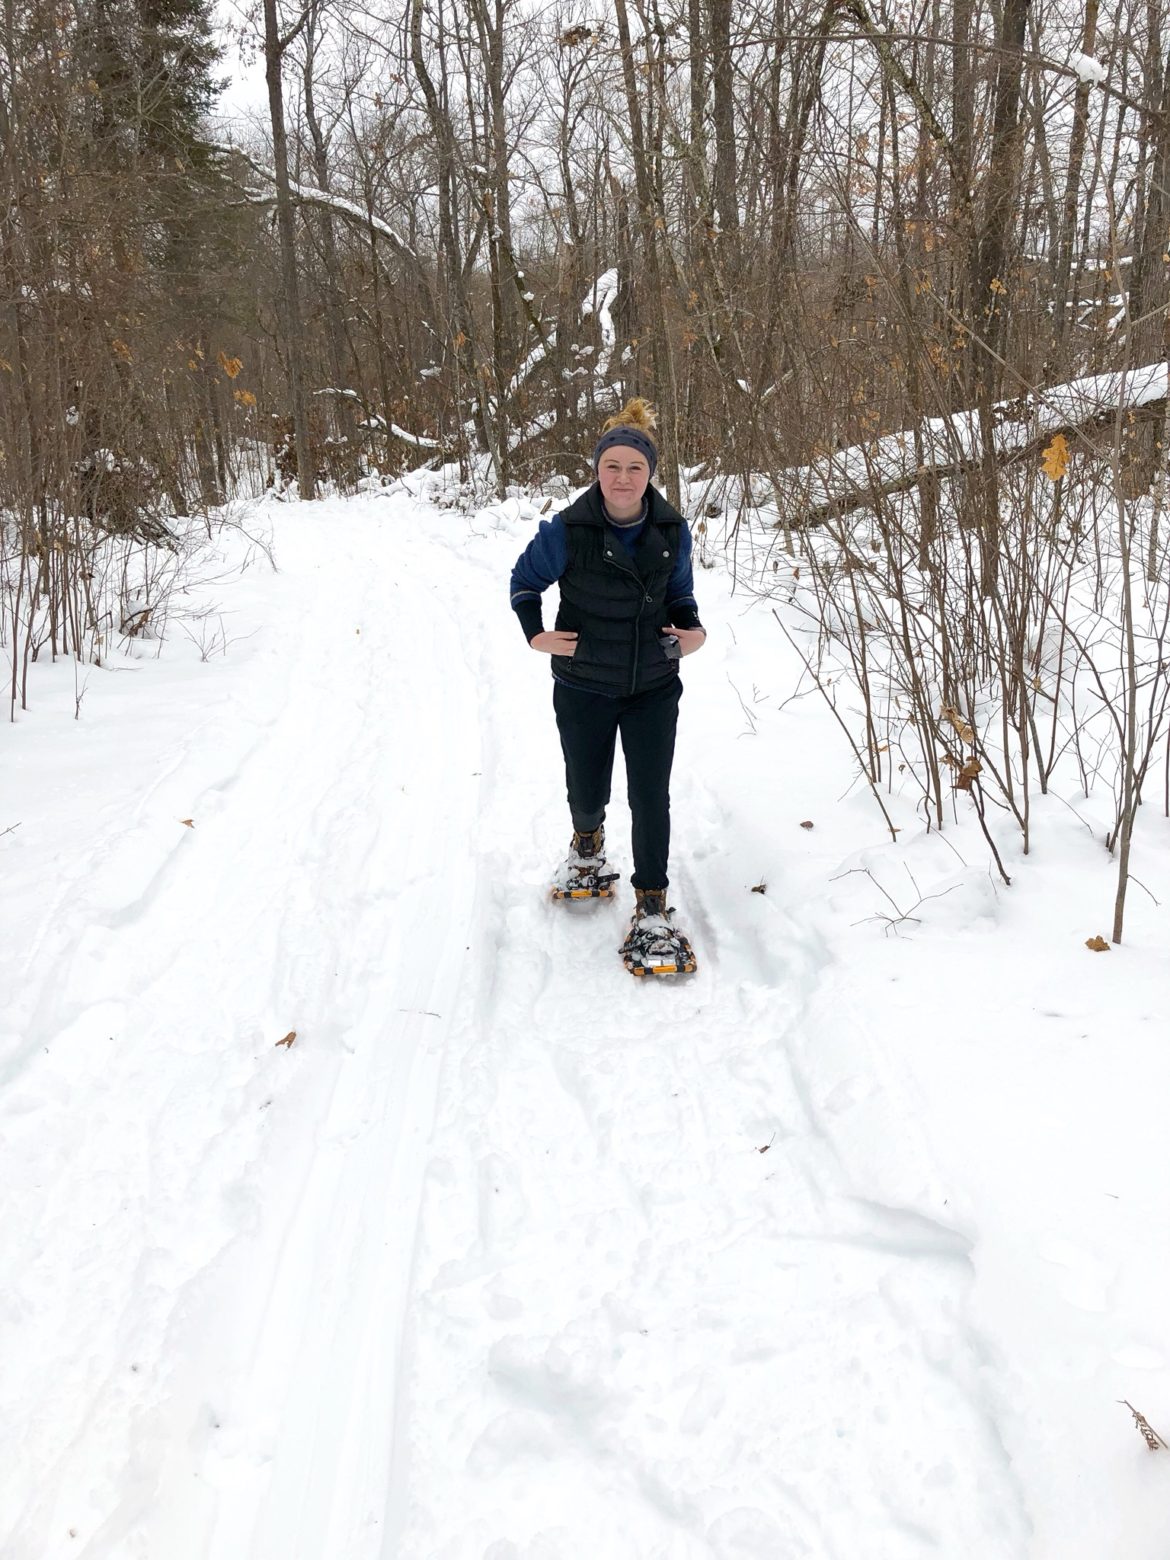 Minnesota Winter Adventures: Snowshoeing · life's little charms